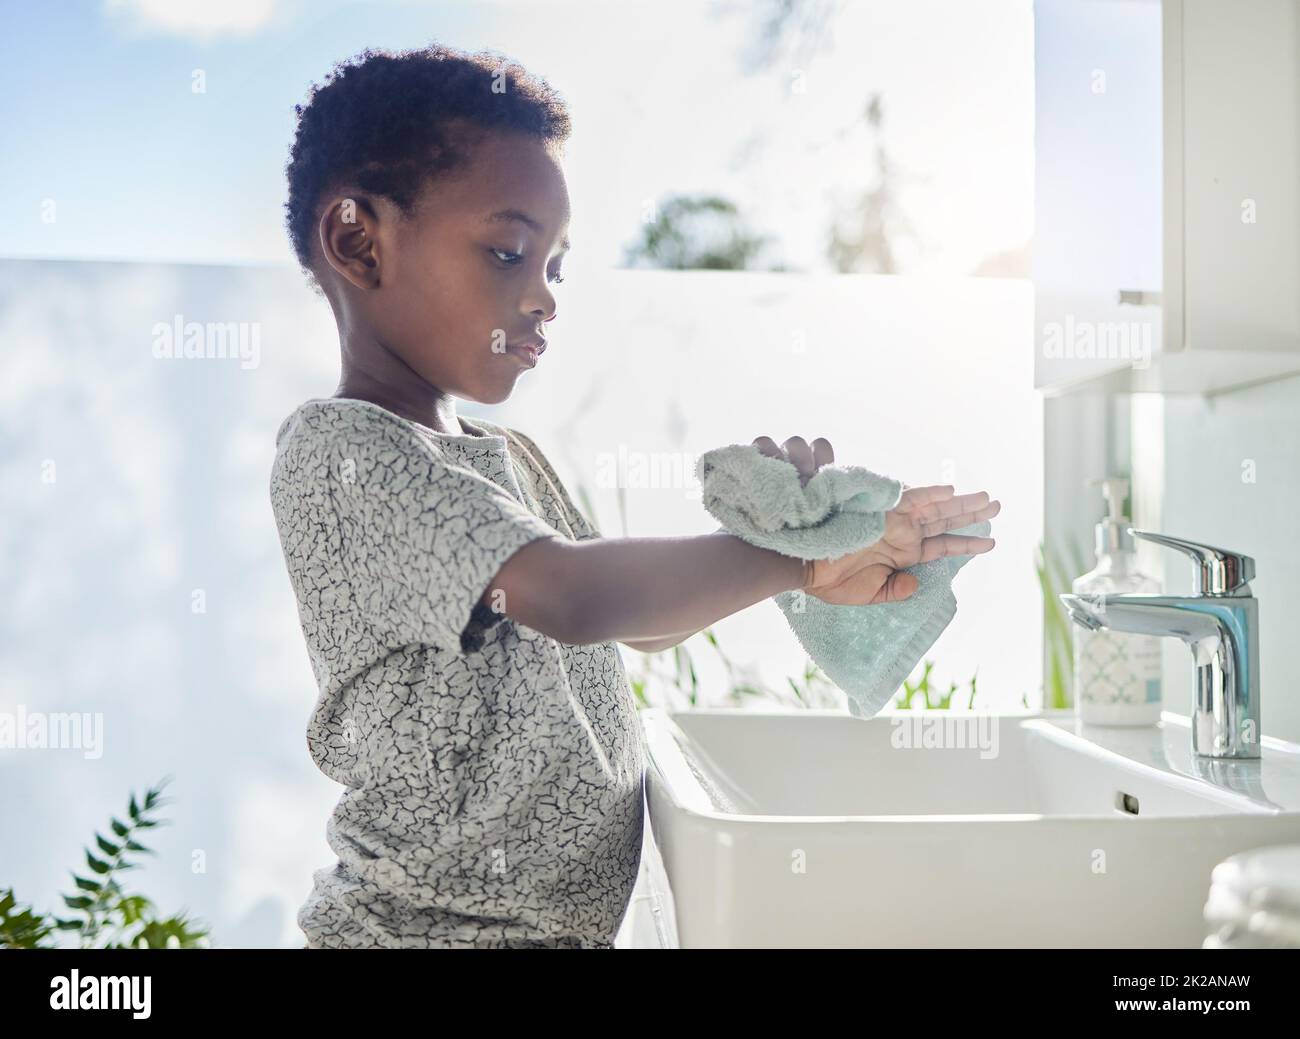 https://c8.alamy.com/comp/2K2ANAW/hes-a-clean-kid-shot-of-a-little-boy-drying-his-hands-with-a-towel-in-a-bathroom-at-home-2K2ANAW.jpg